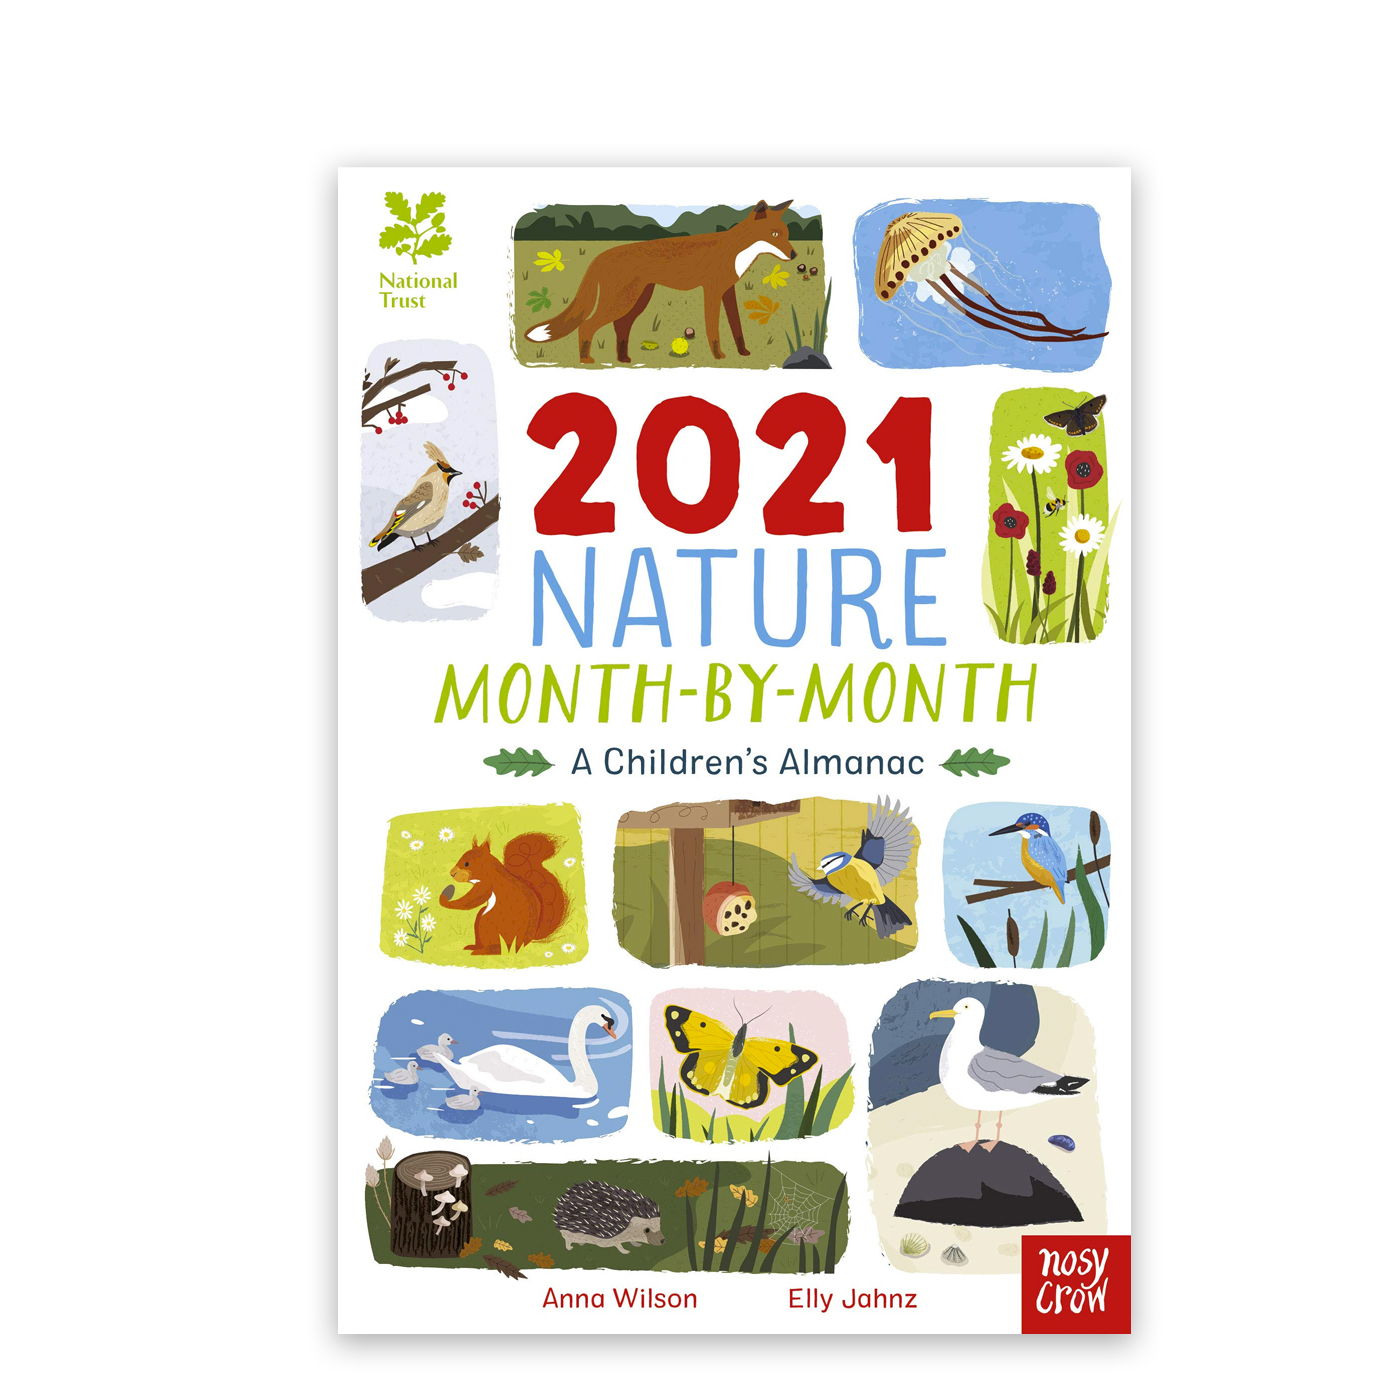  National Trust 2021 Nature Month-By-Month A Childrens Almanac